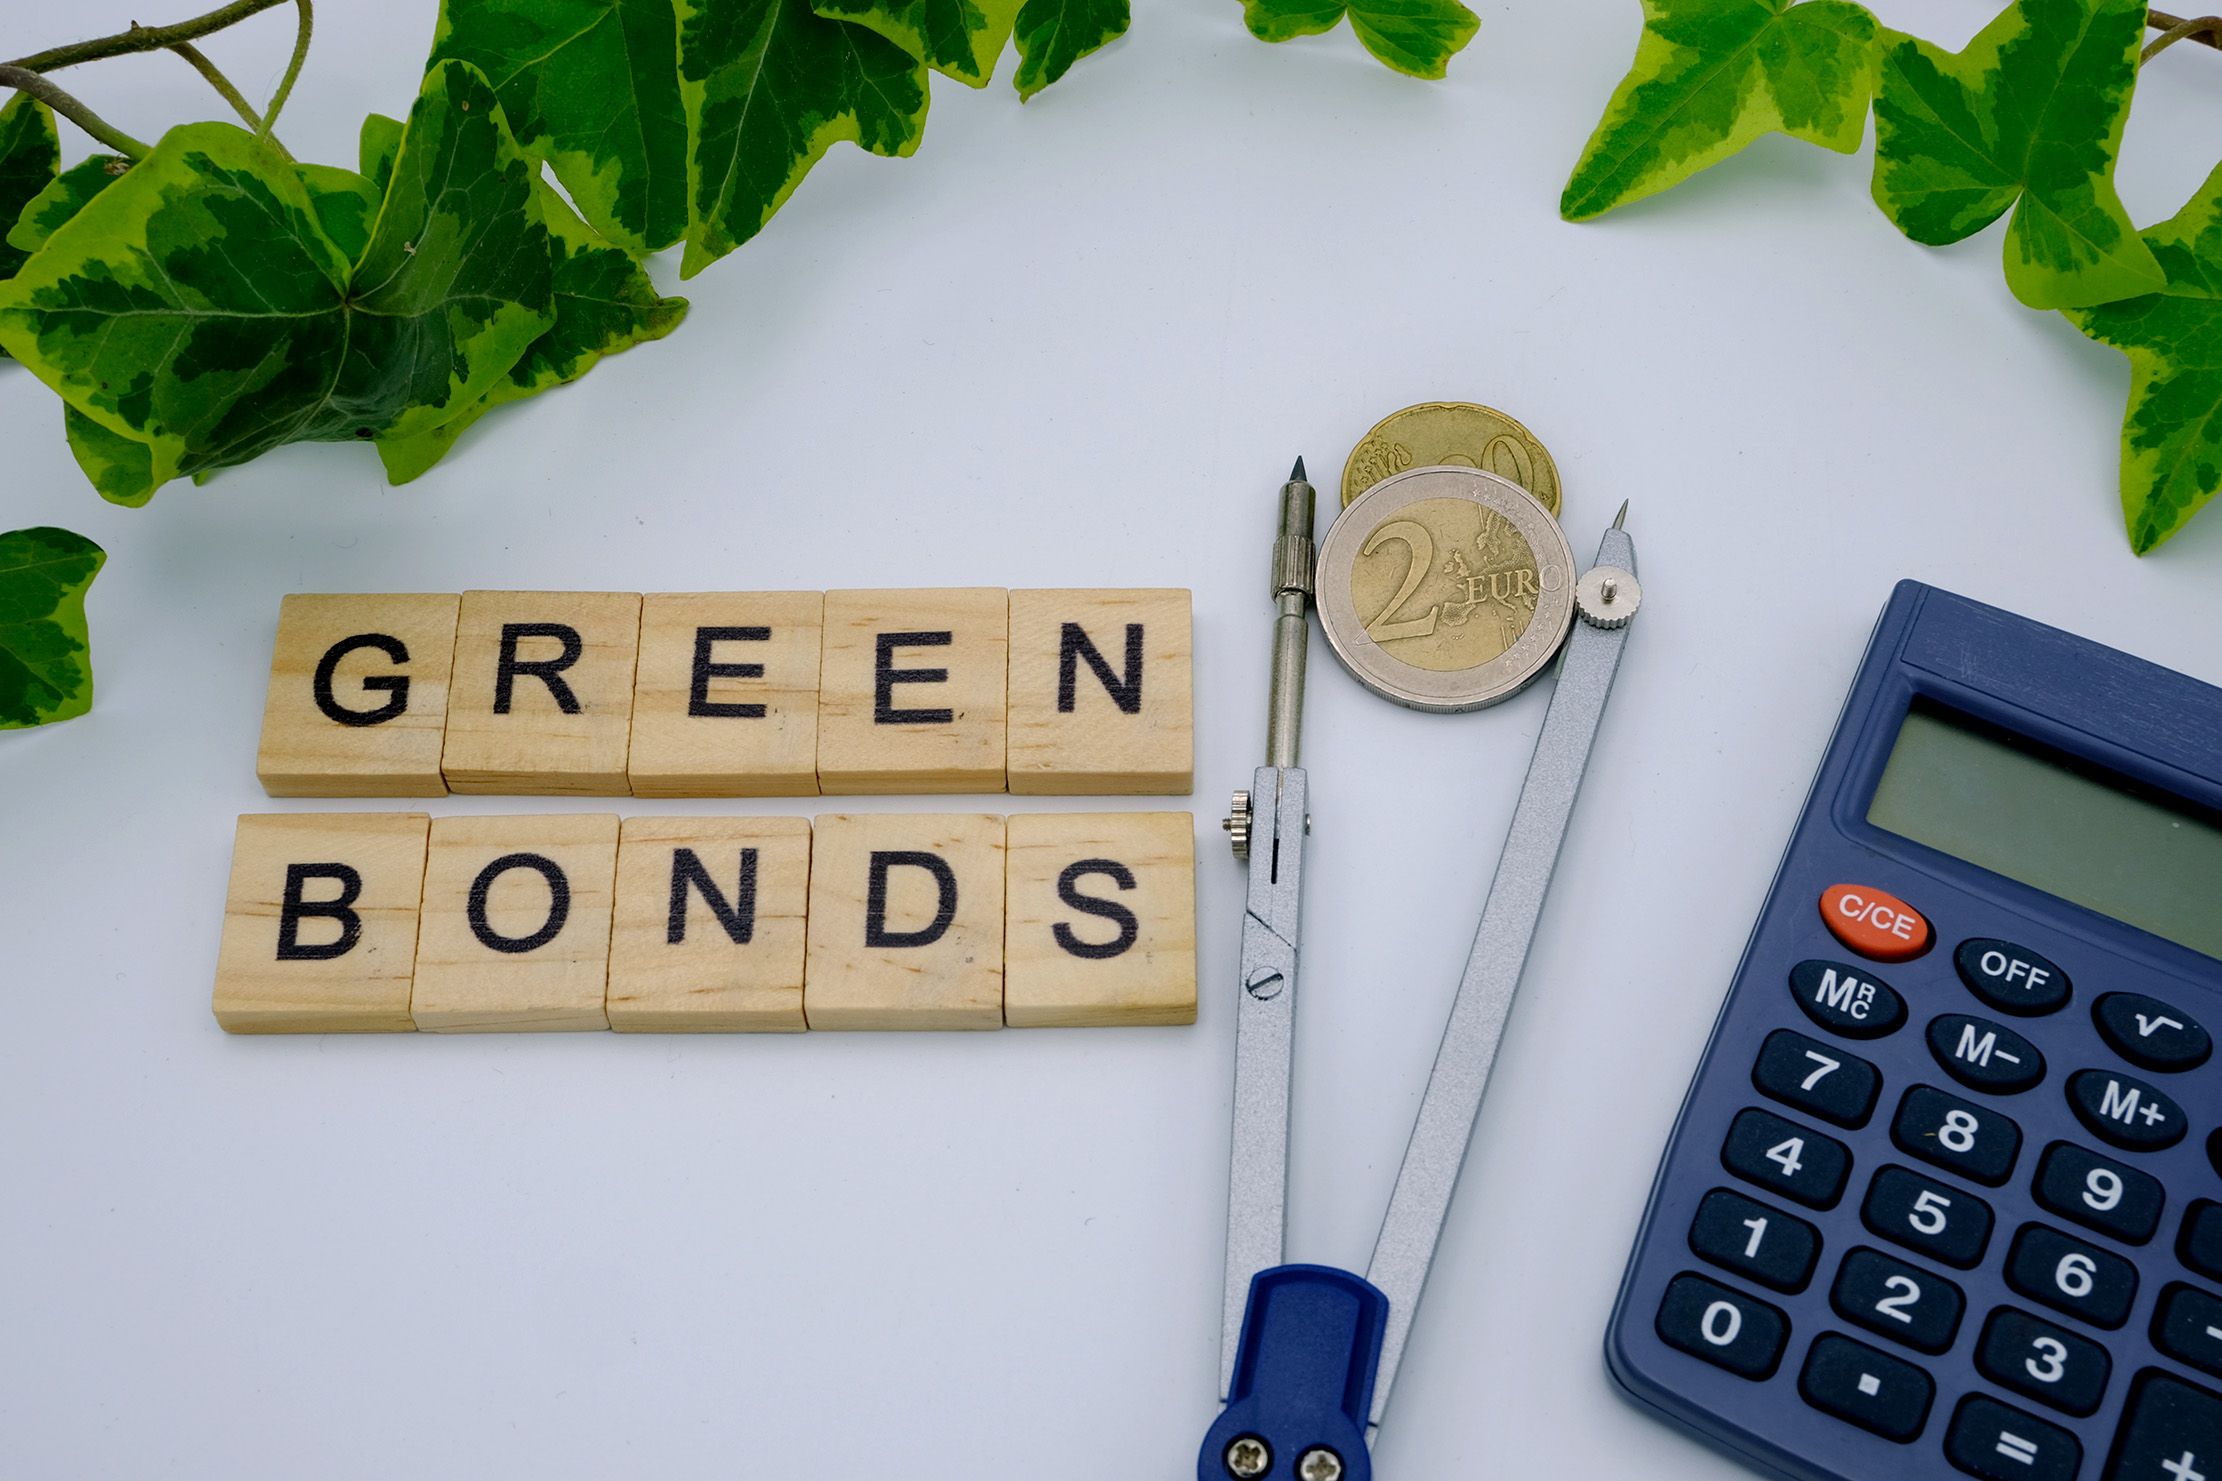 Govt likely to issue green bonds in Jan-March quarter